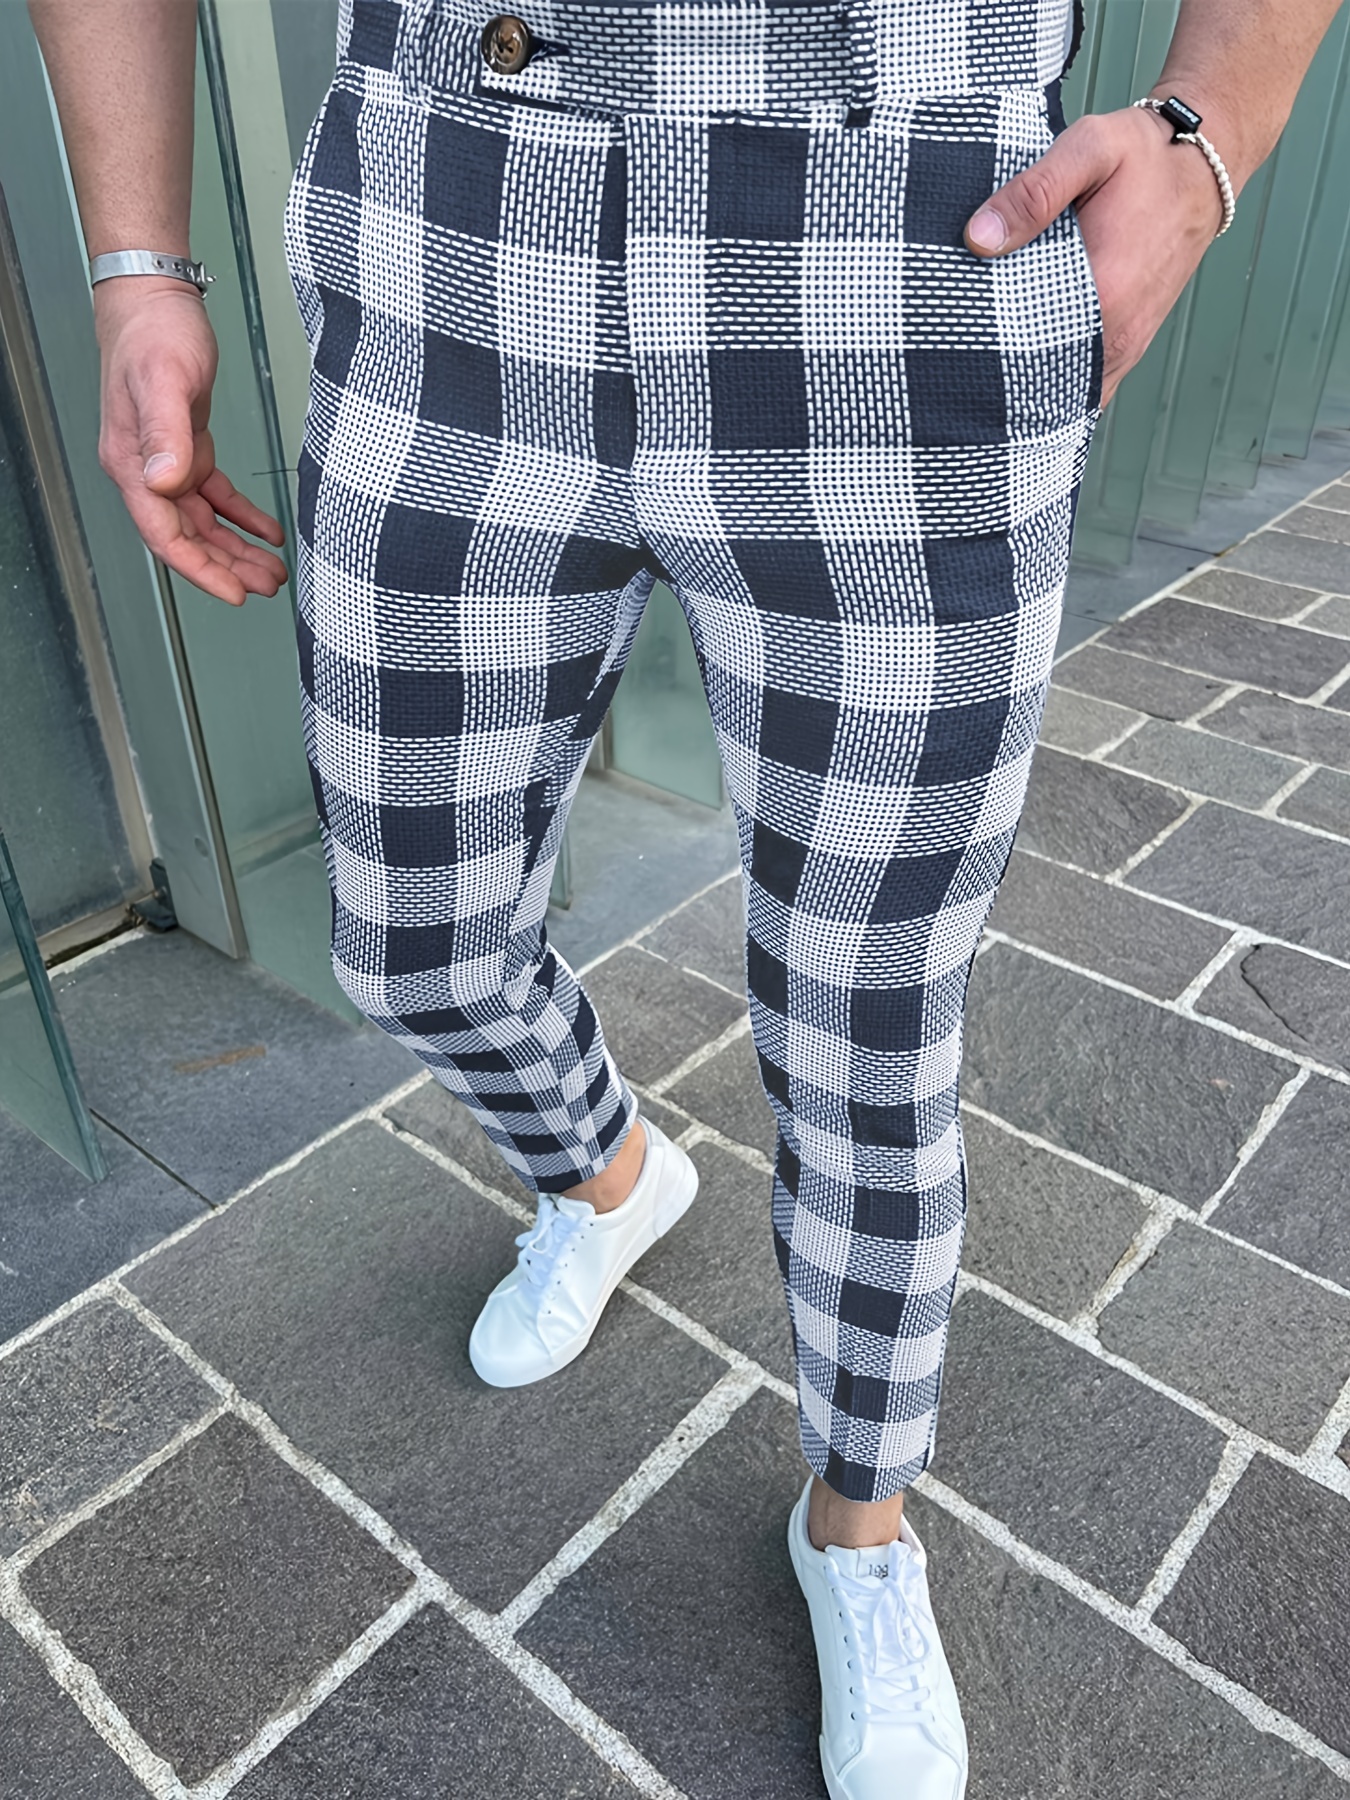 Men's Plaid Flat-Front Stretch Pants Mens Lightweight Dress Pants Relaxed  Fit with Pockets Slim Fit Pants Men